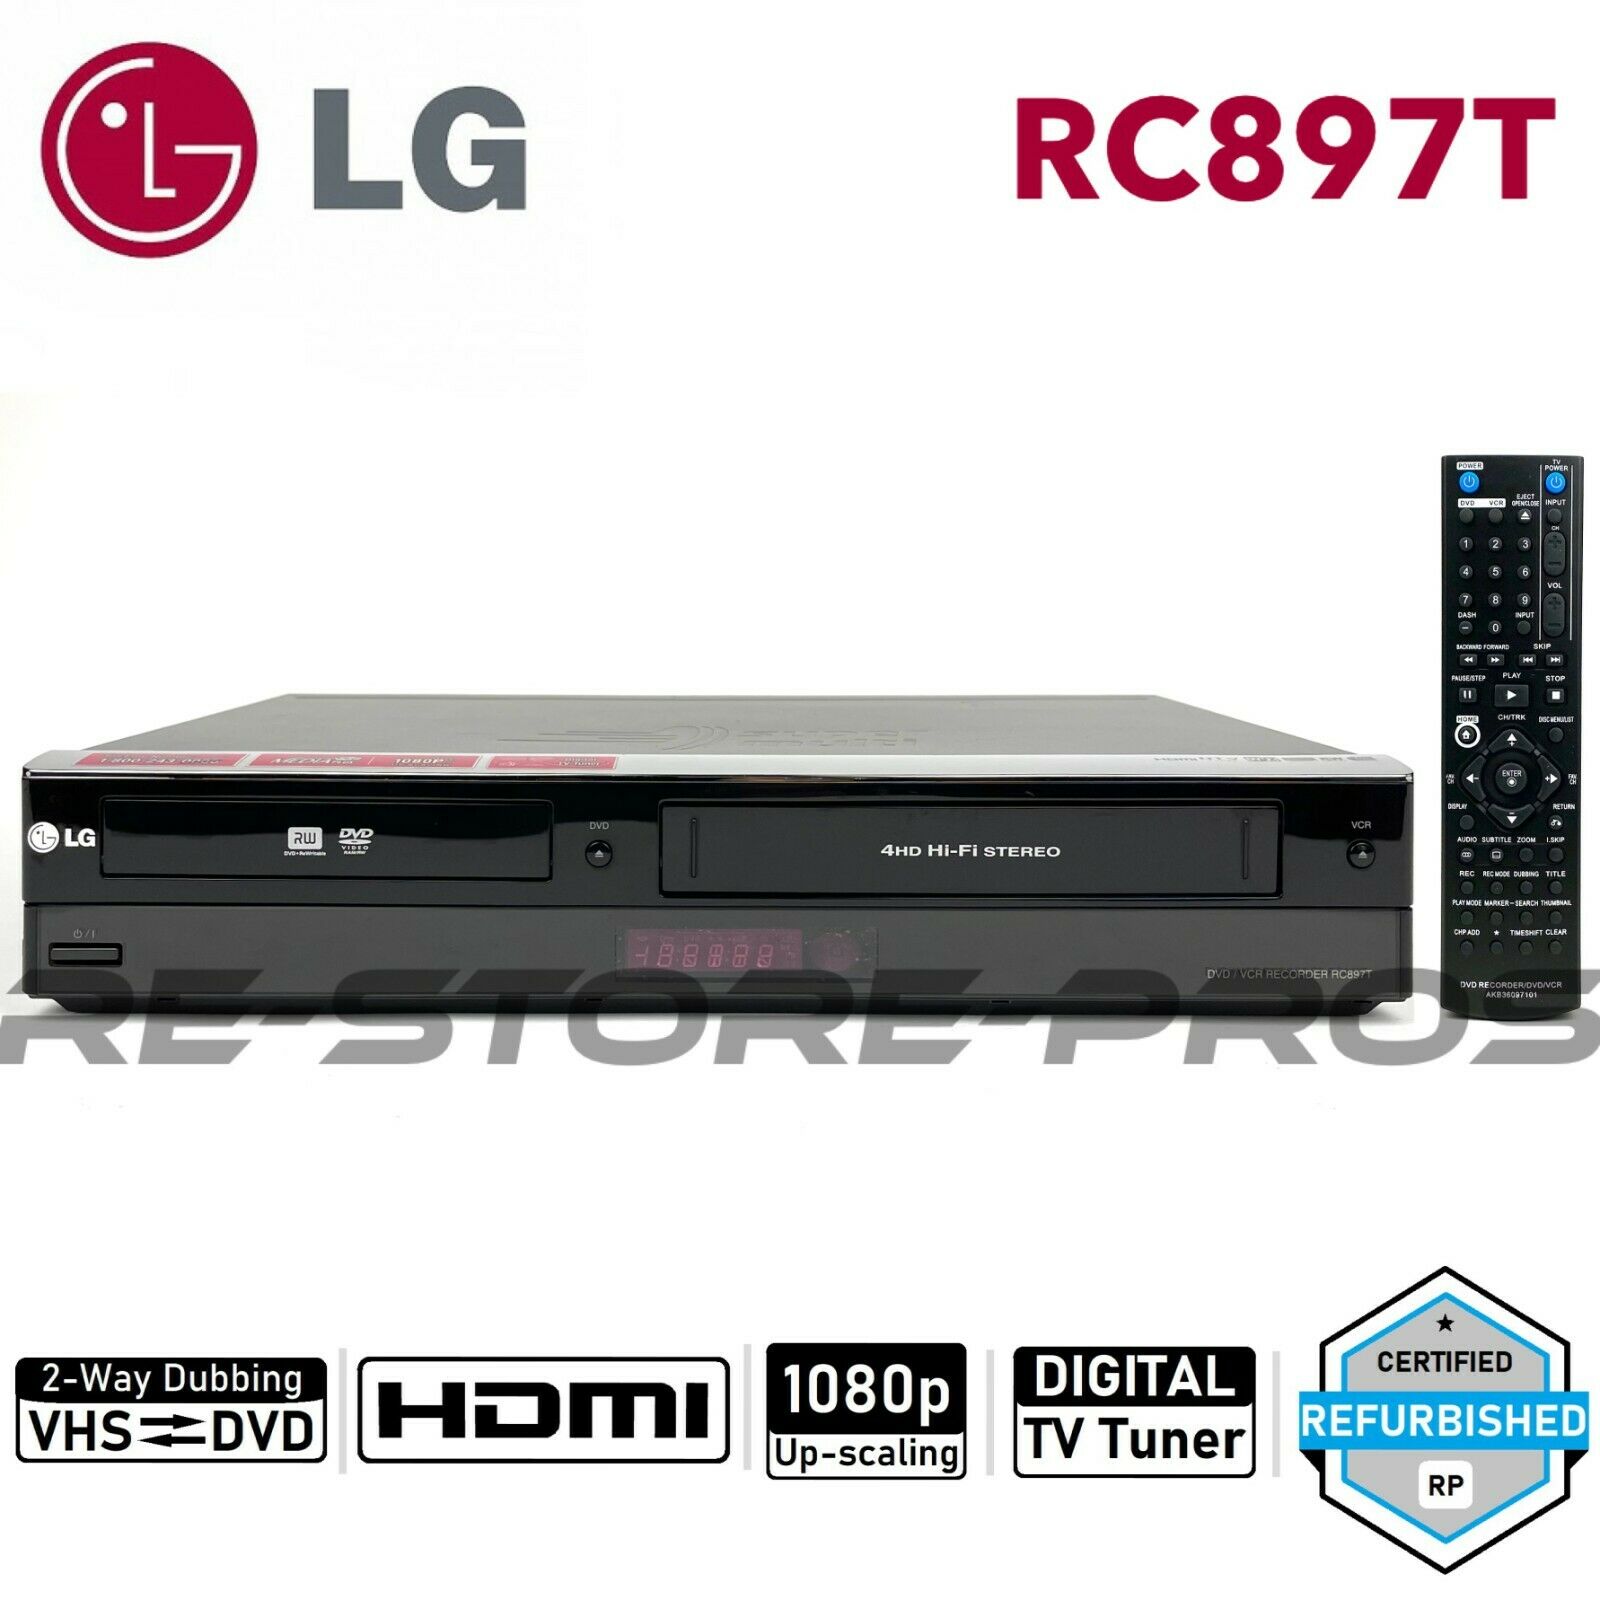 Lg Rc897t Dvd Vcr Combo Player Vhs To Dvd Recording Hdmi 1080p Upscaling Remote